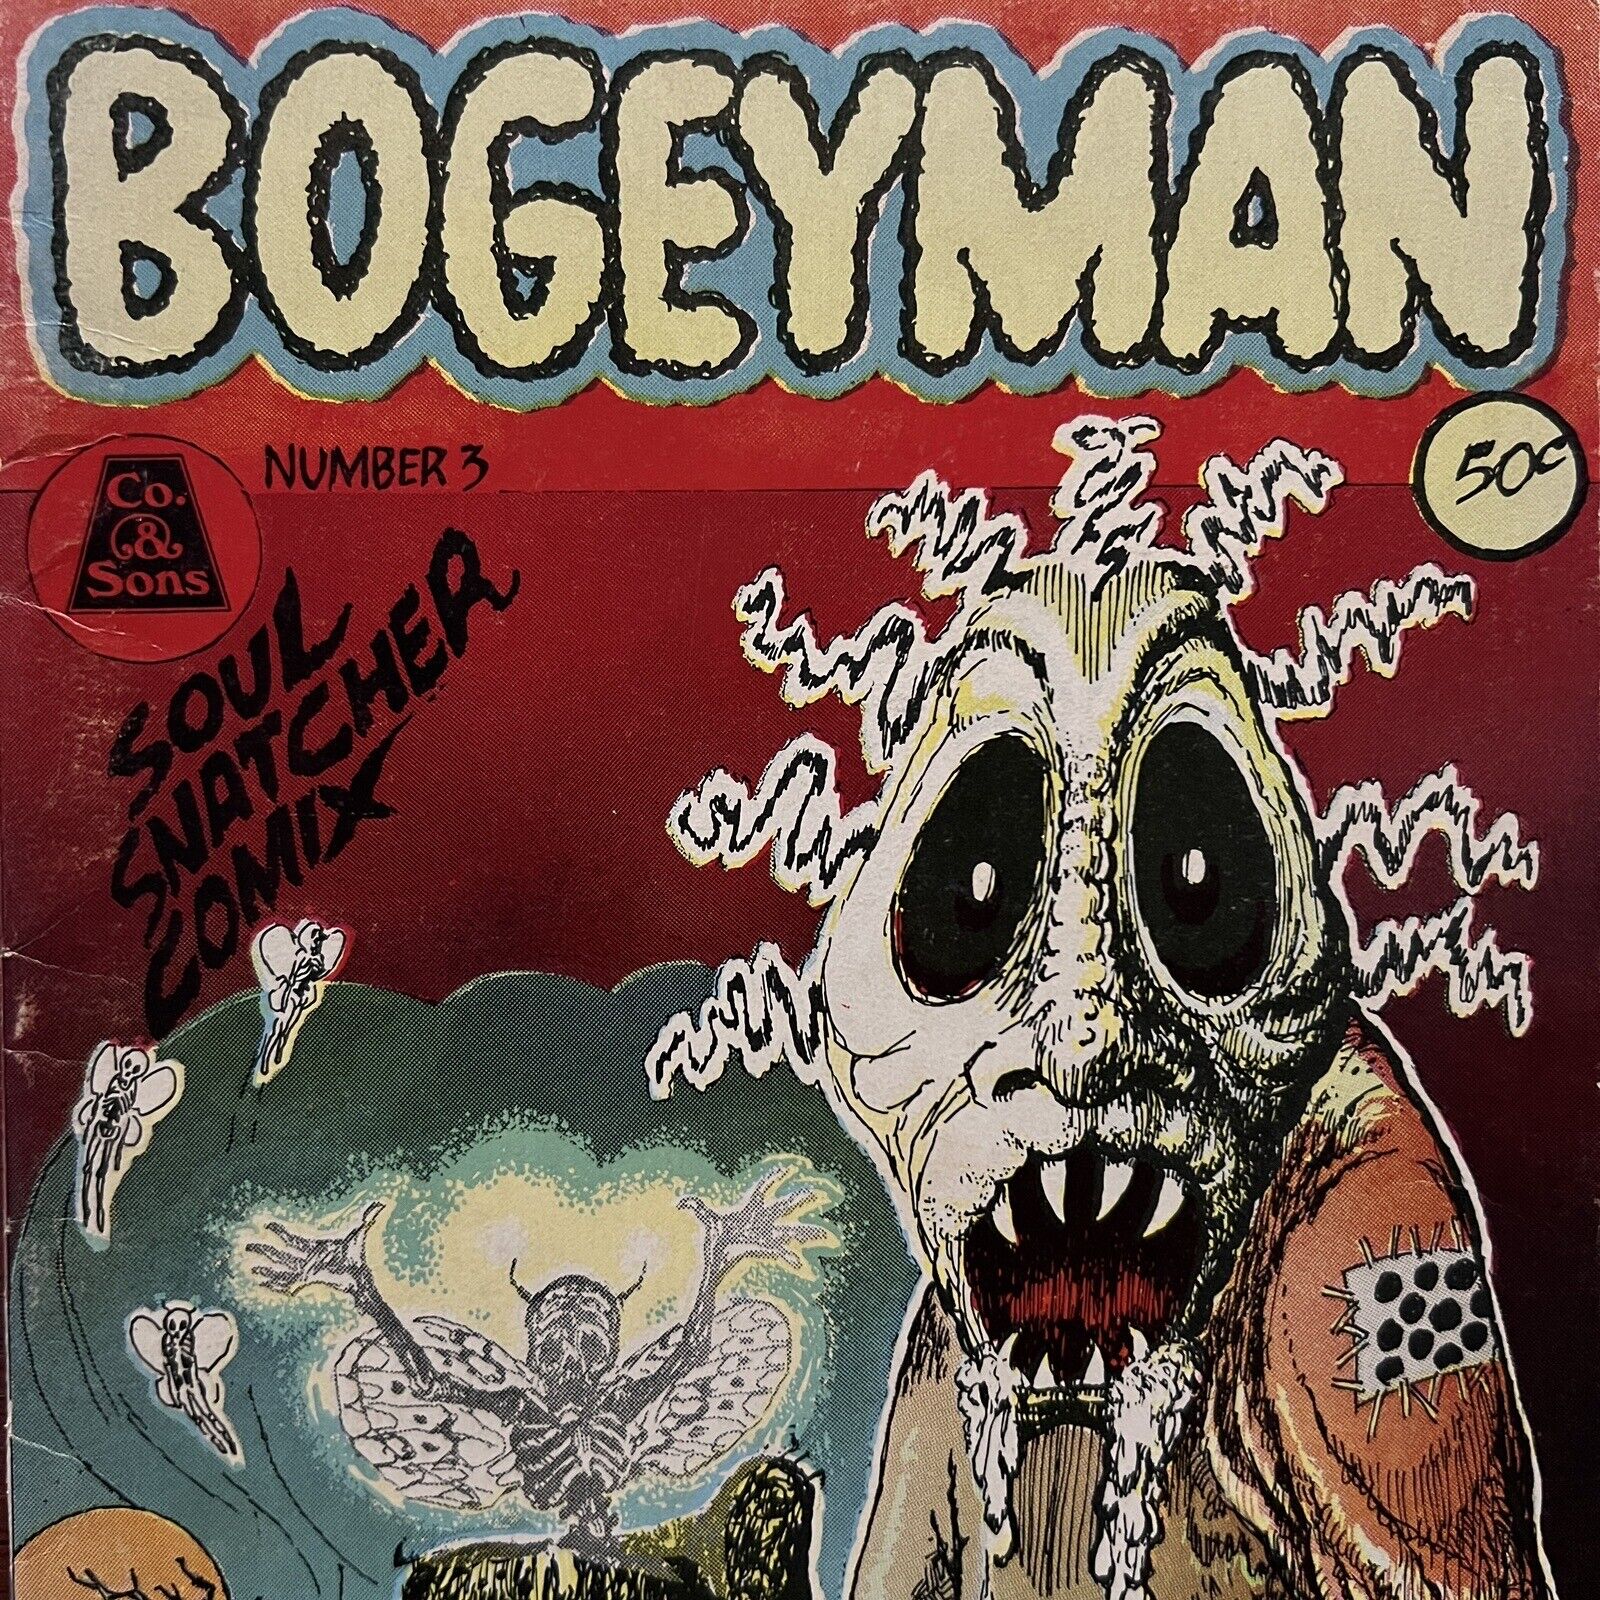 Bogeyman #3 (Red) 1970 Co & Sons Greg Irons Rick Griffin Underground Comix OOP👀